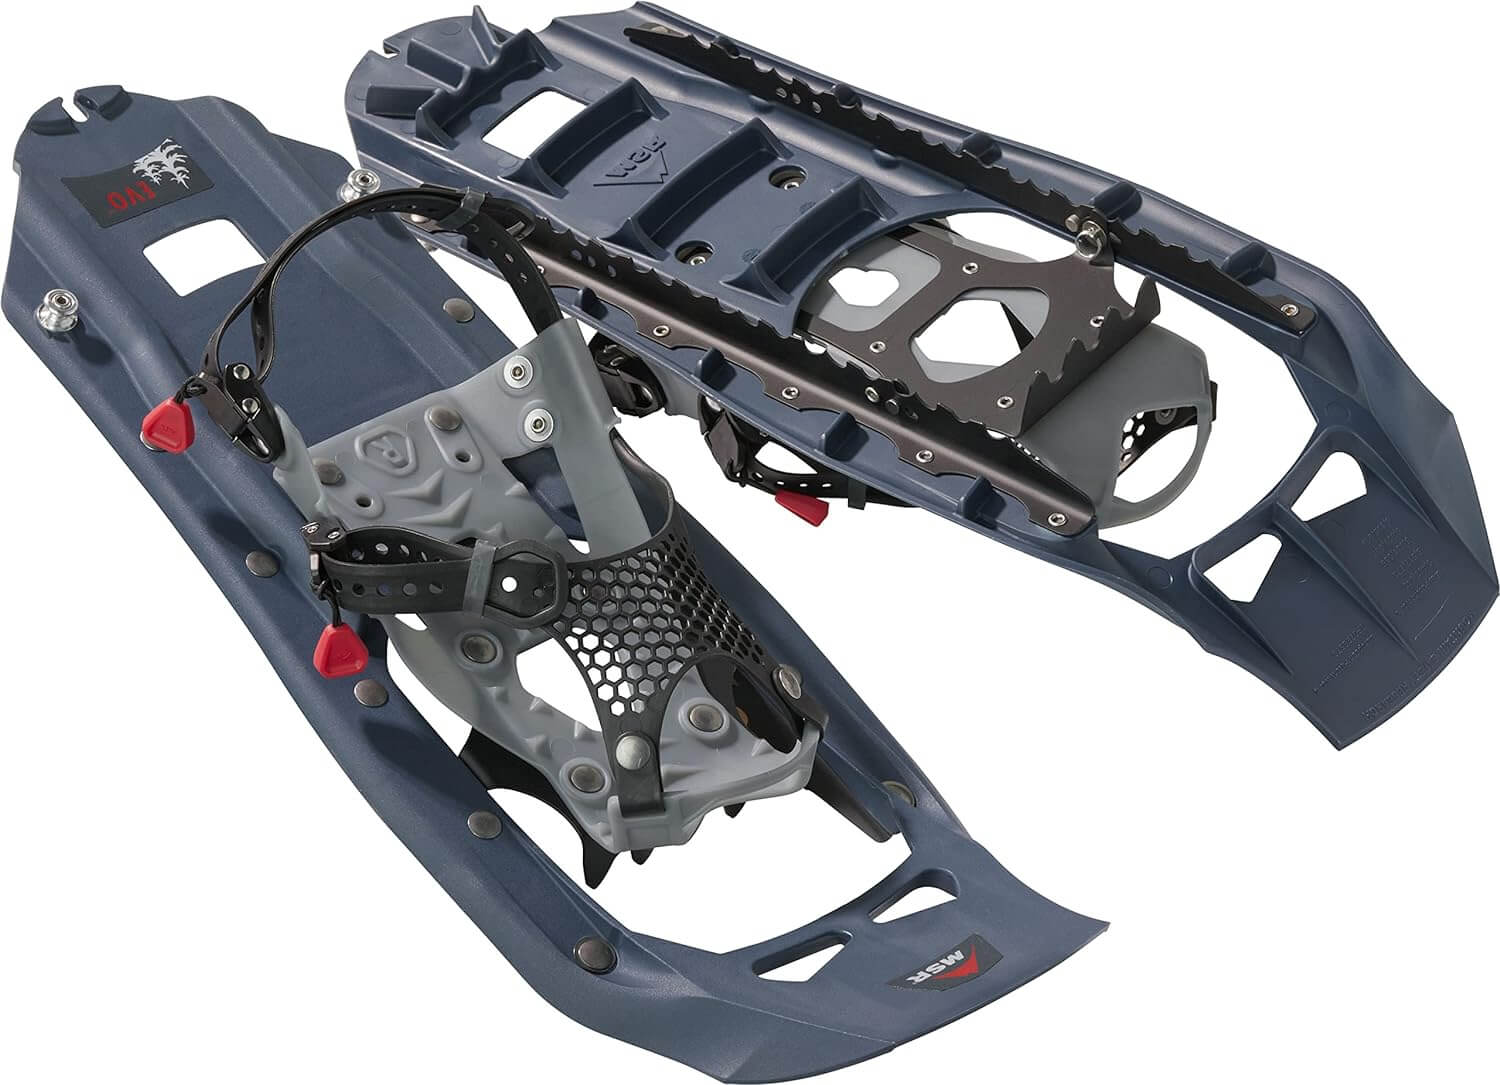 Shop The Latest >MSR Evo Trail Snowshoes - Made in the USA > *Only $229.43*> From The Top Brand > *MSRl* > Shop Now and Get Free Shipping On Orders Over $45.00 >*Shop Earth Foot*